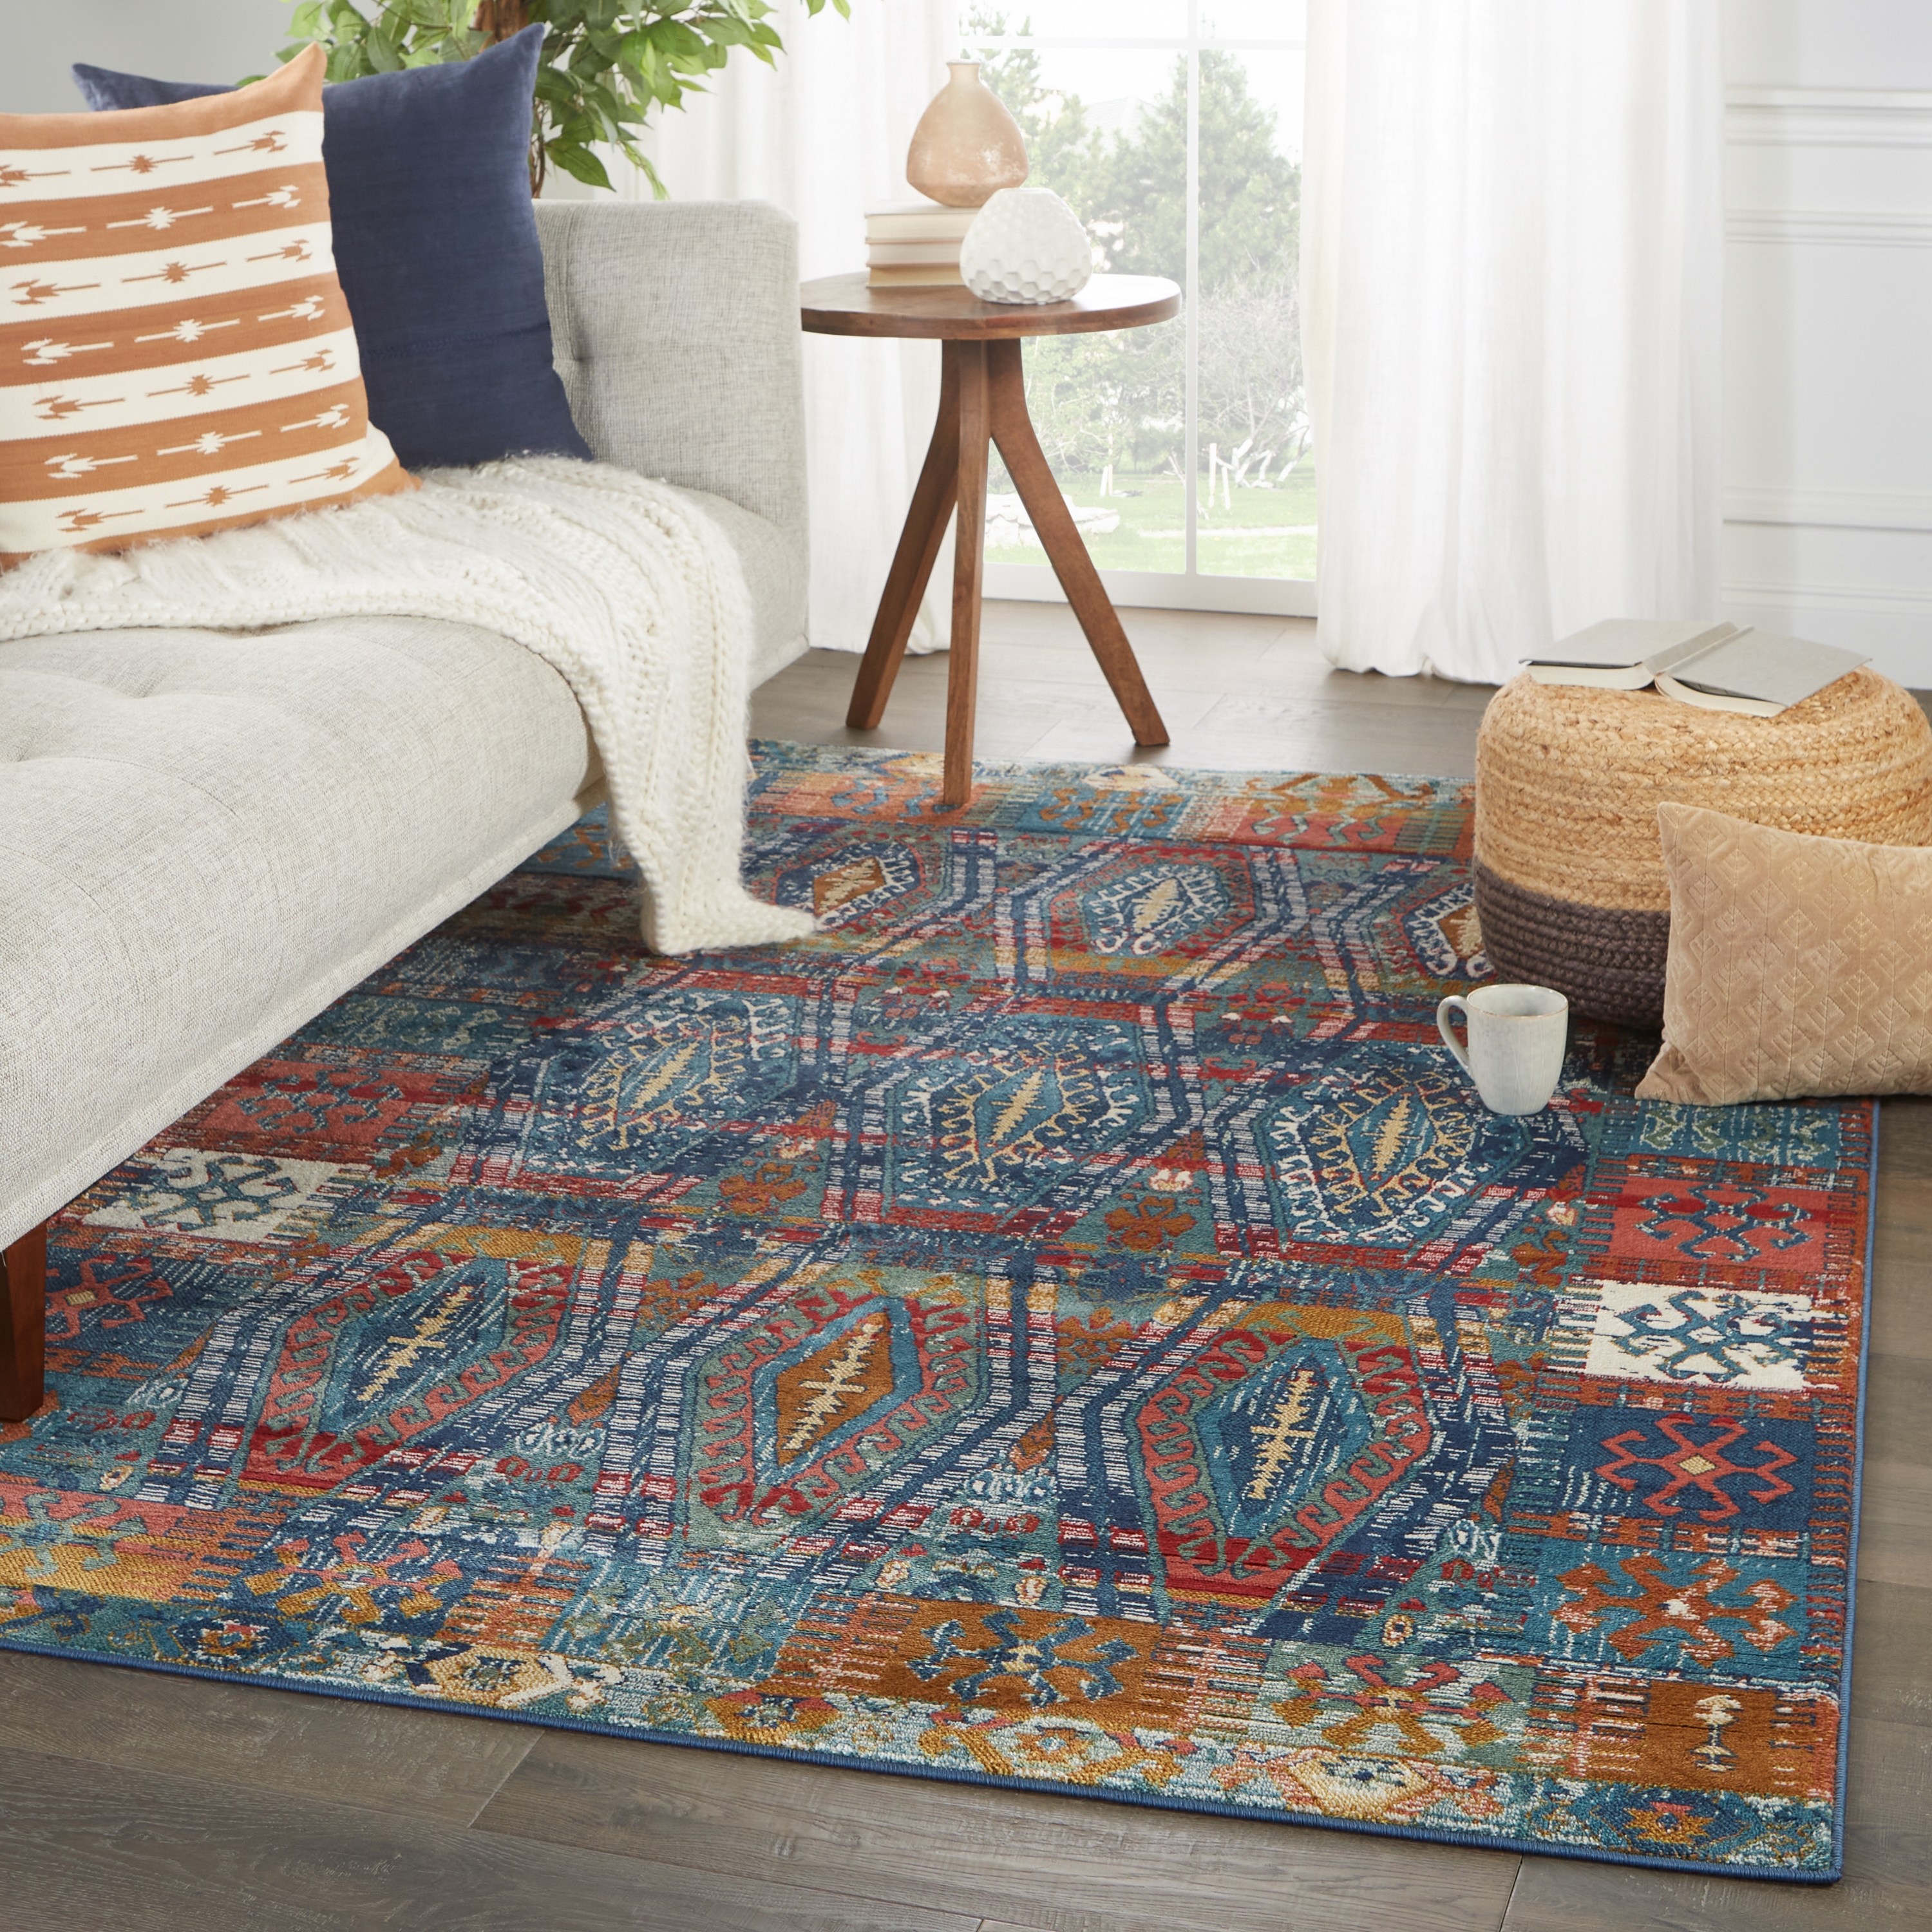 Vibe By Miron Trellis Blue/ Red Area Rug (7'6"X9'6") - Image 4